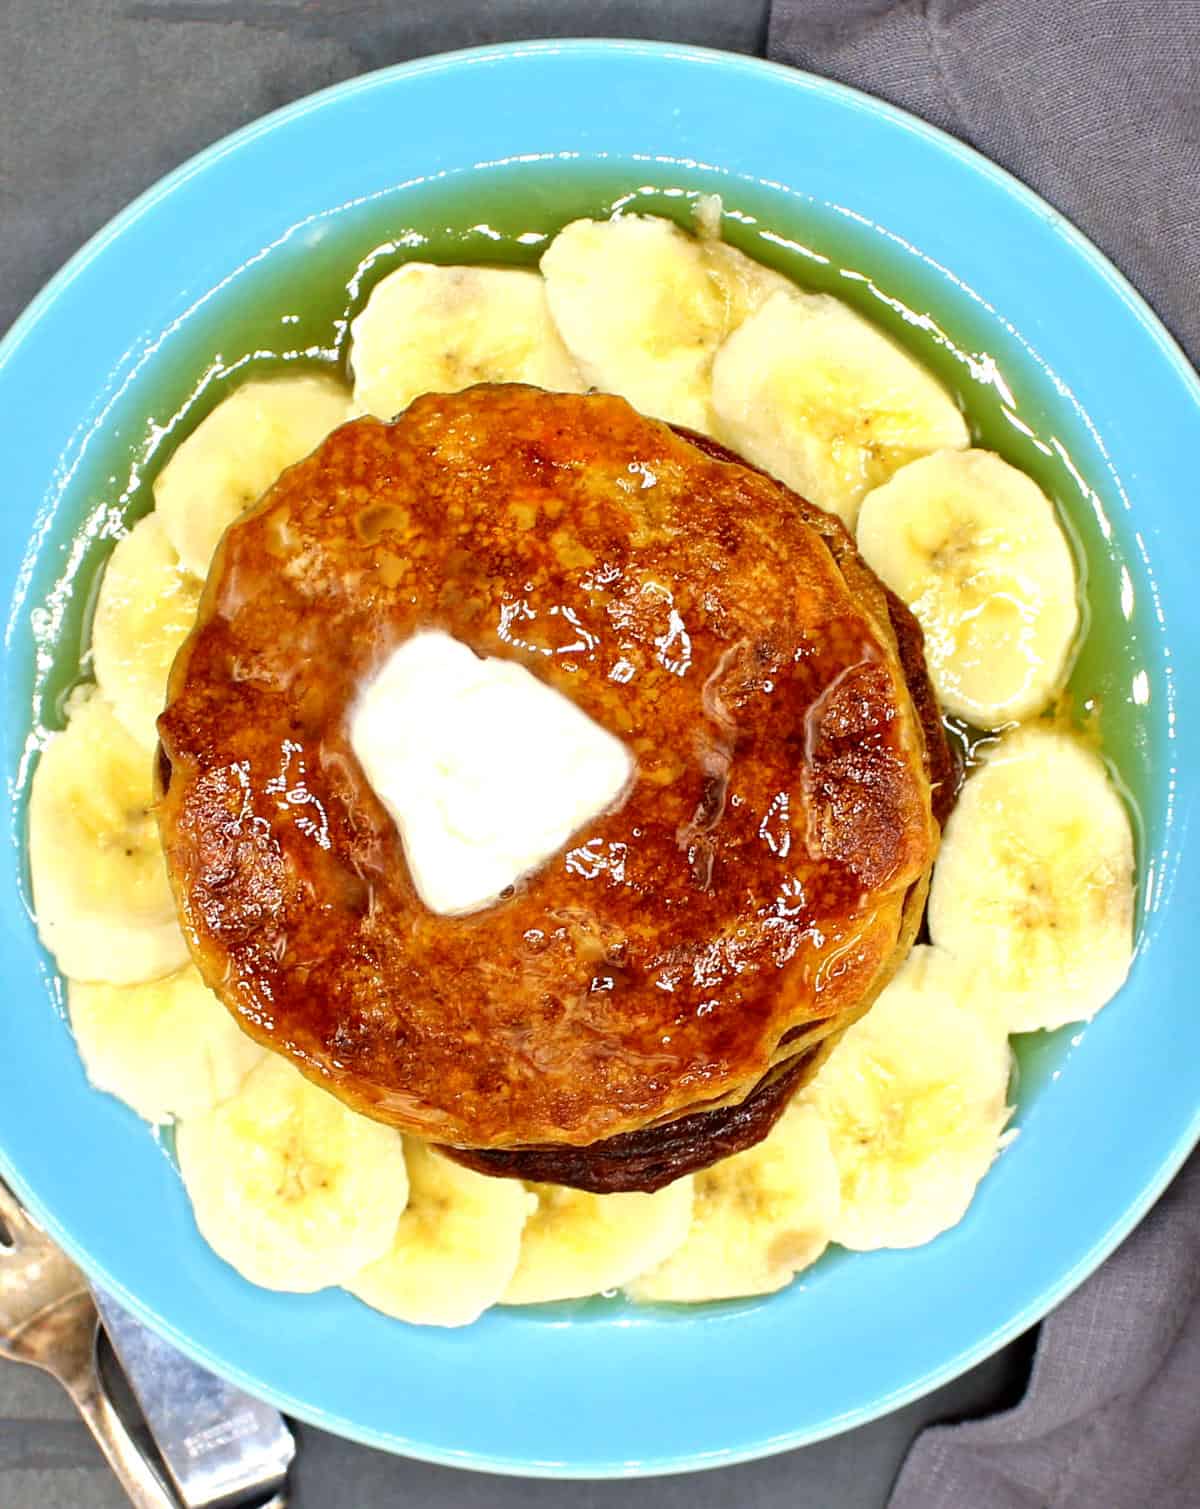 Vegan sweet potato pancakes with a pat of butter, maple syrup and slices of banana in blue plate.